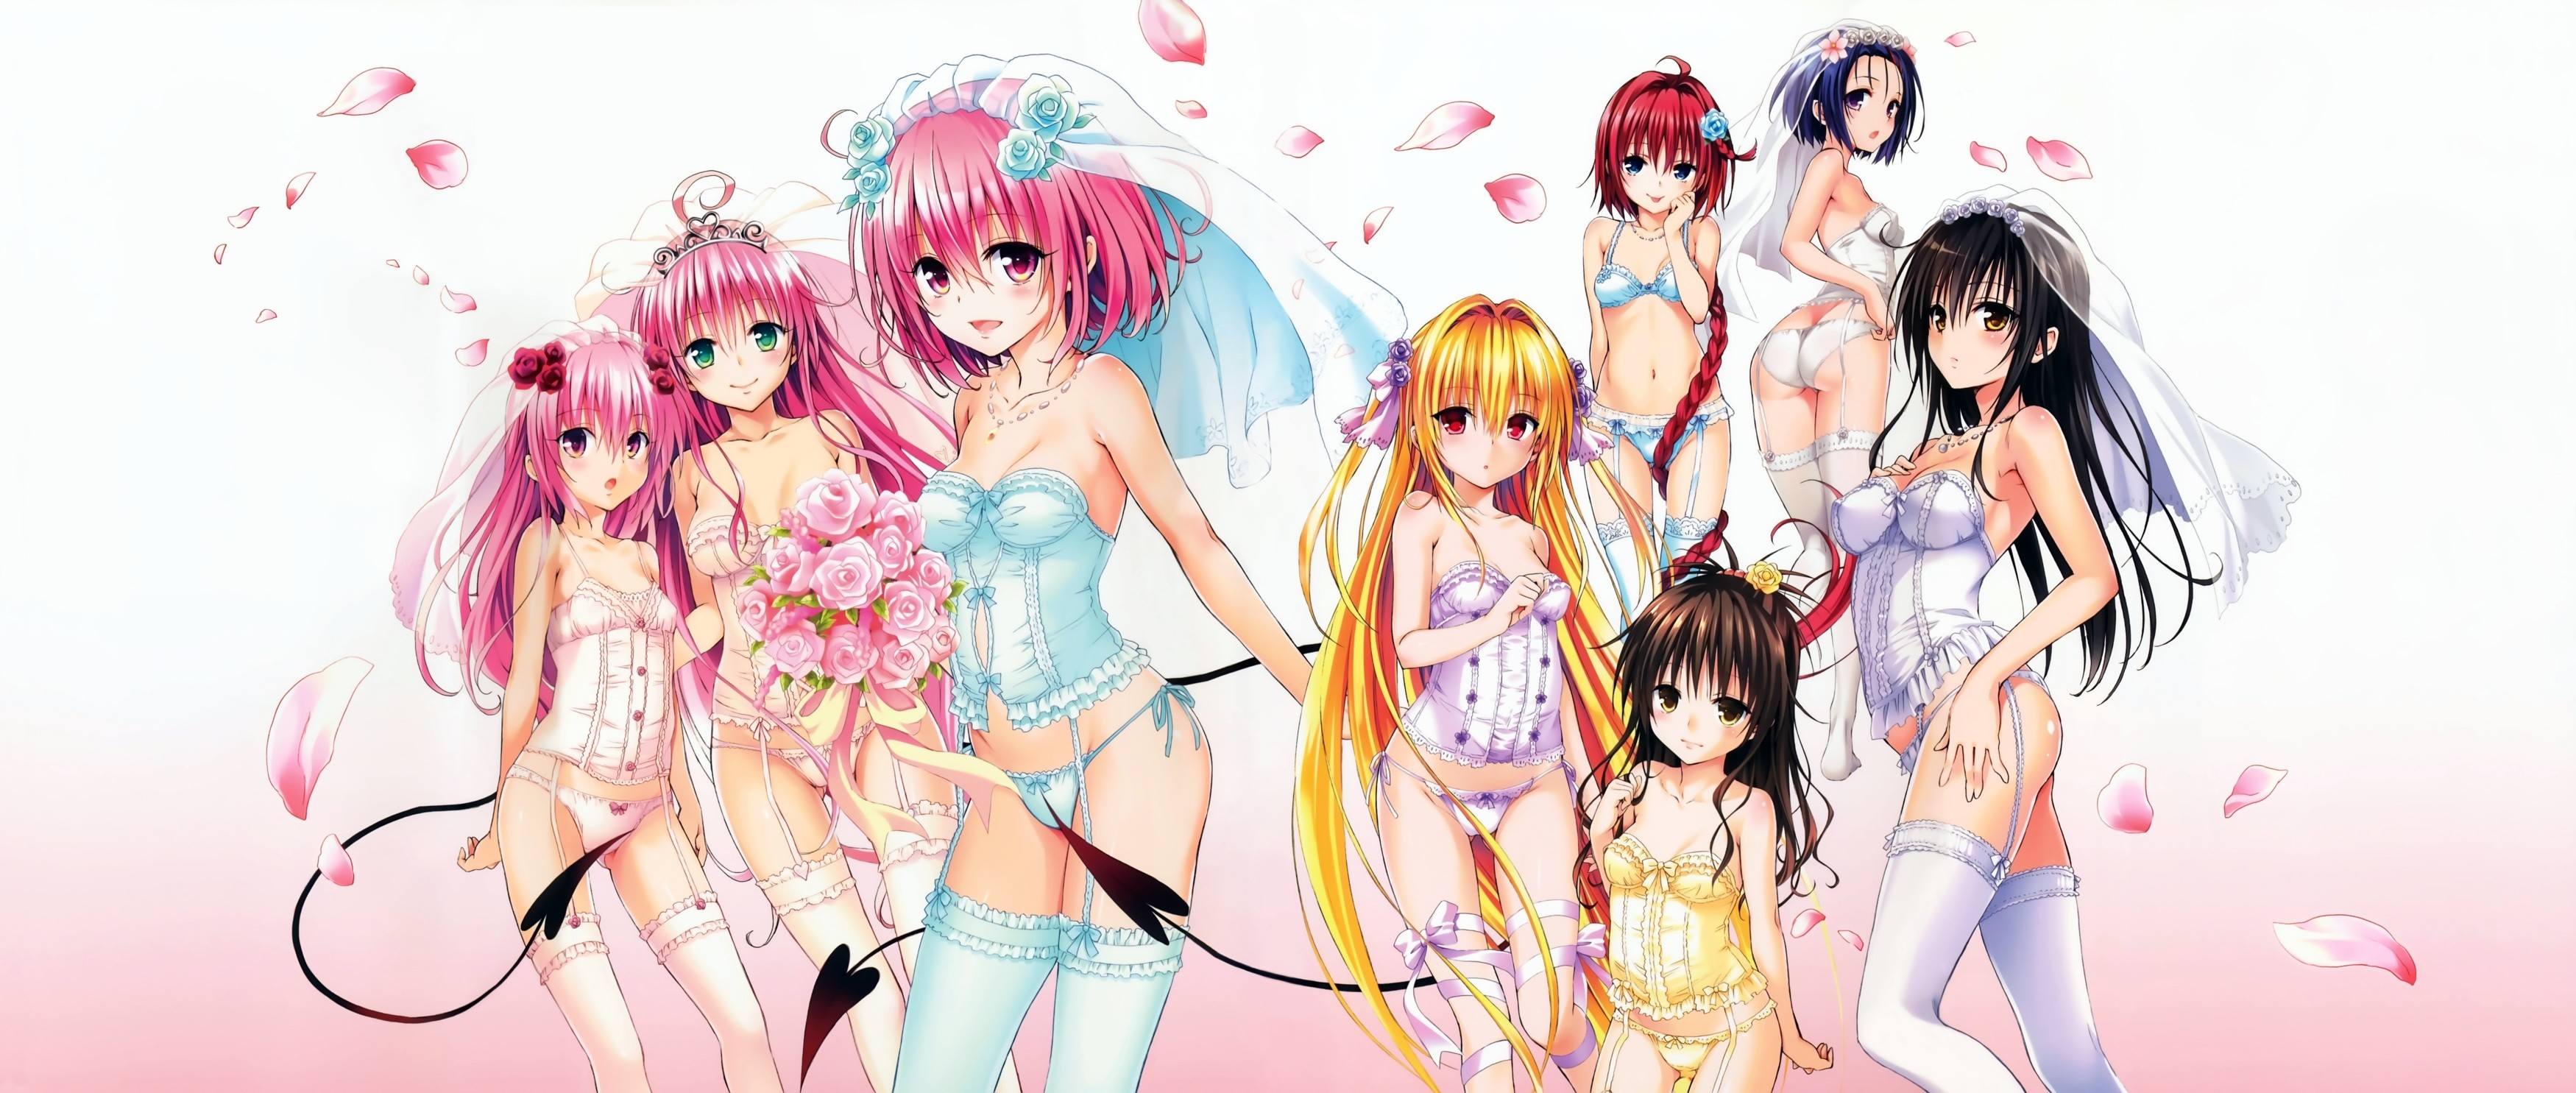 3500x1485 The only To Love-Ru wallpaper you need